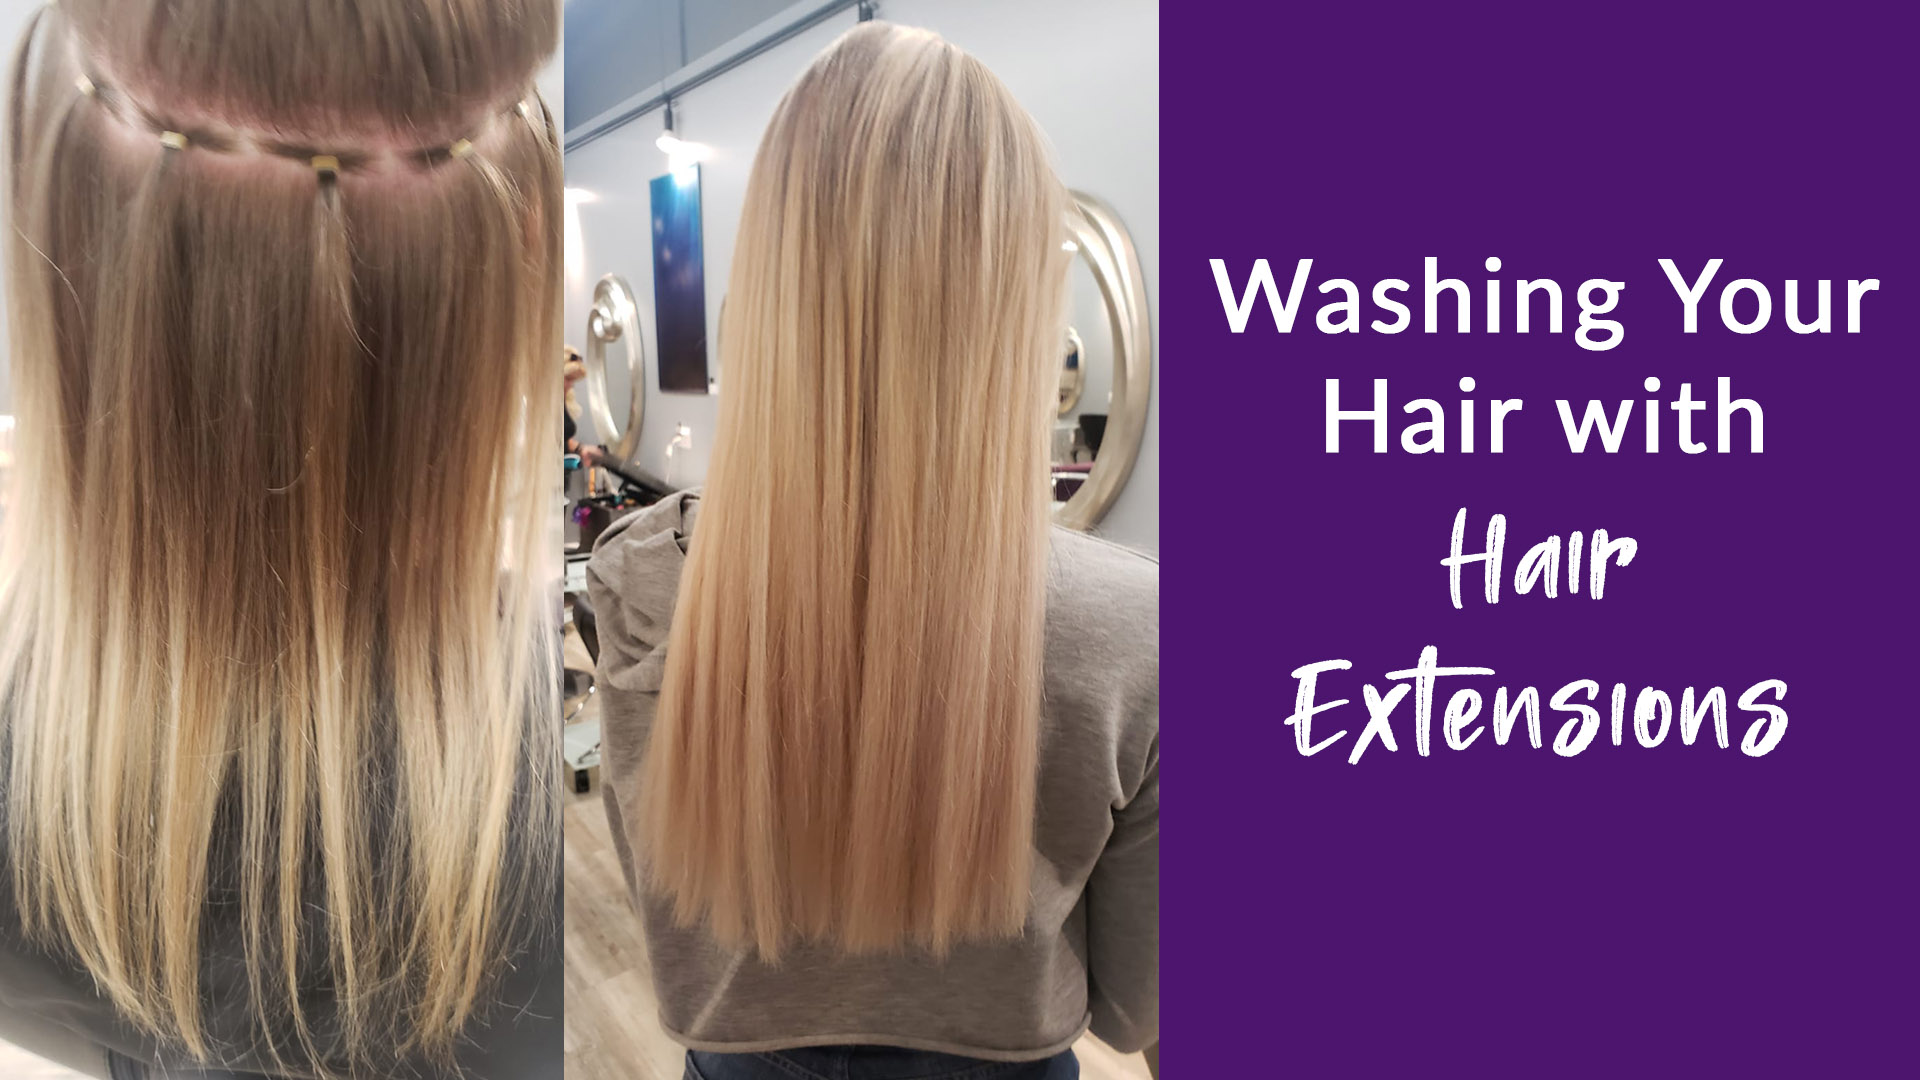 How to Wash Your Hair When You Have Hair Extensions | Salon Nirvana 954